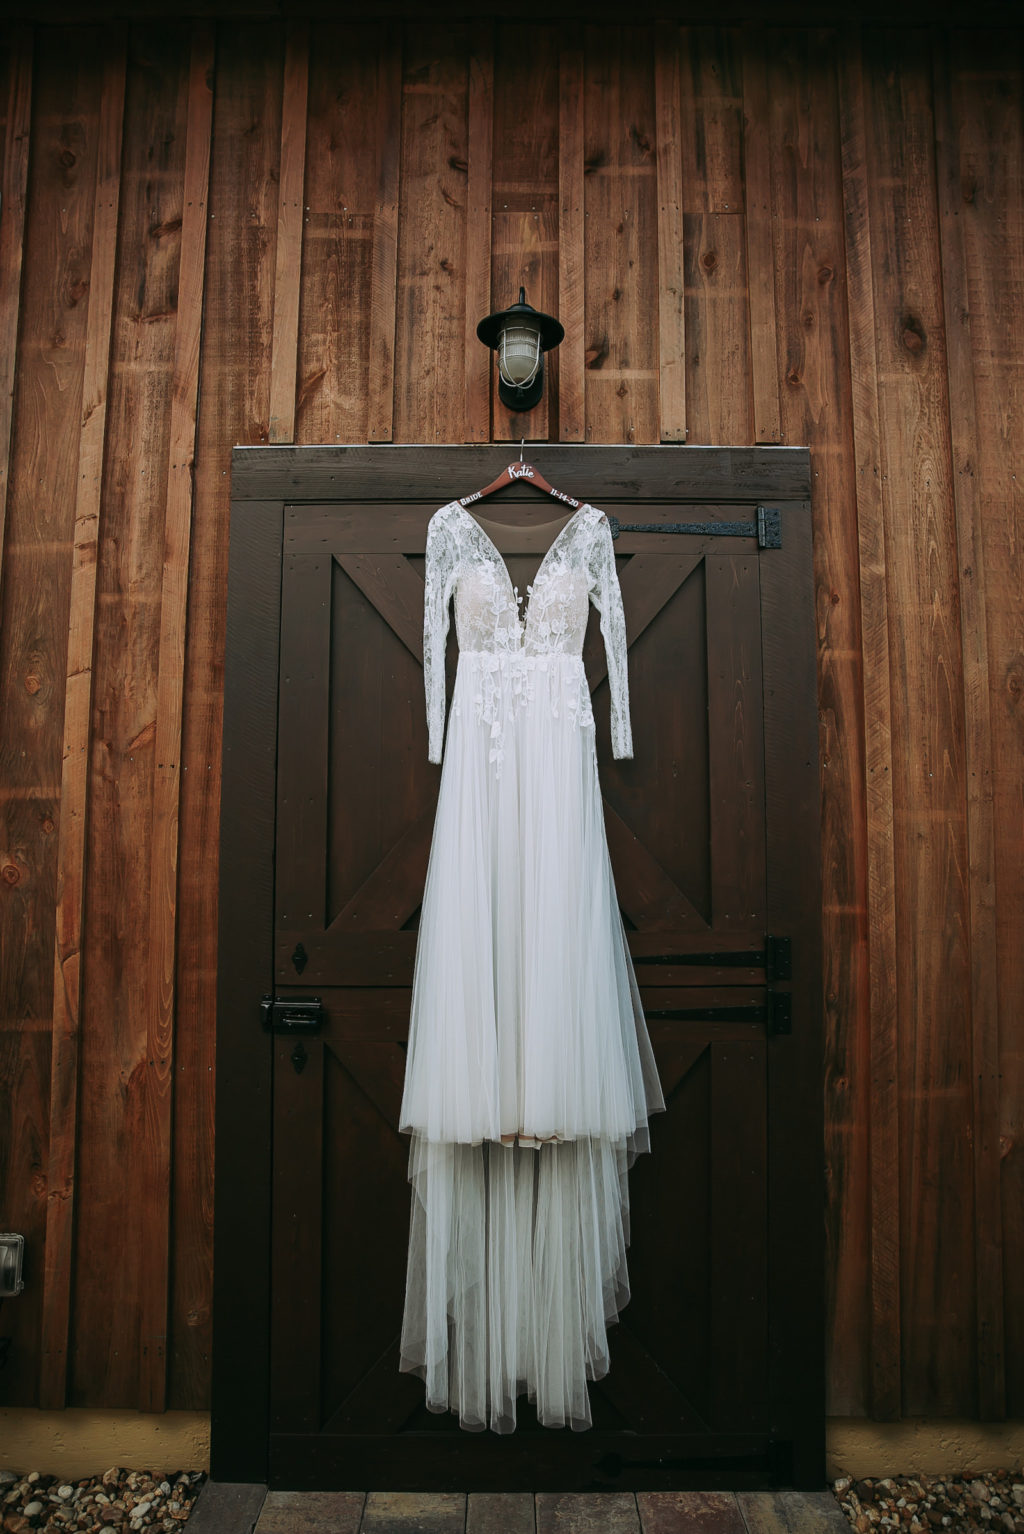 Long Sleeve Lace and Illusion Plunging V neckline Hanging on Barn Door | Tampa Wedding Venue Mision Lago Estate